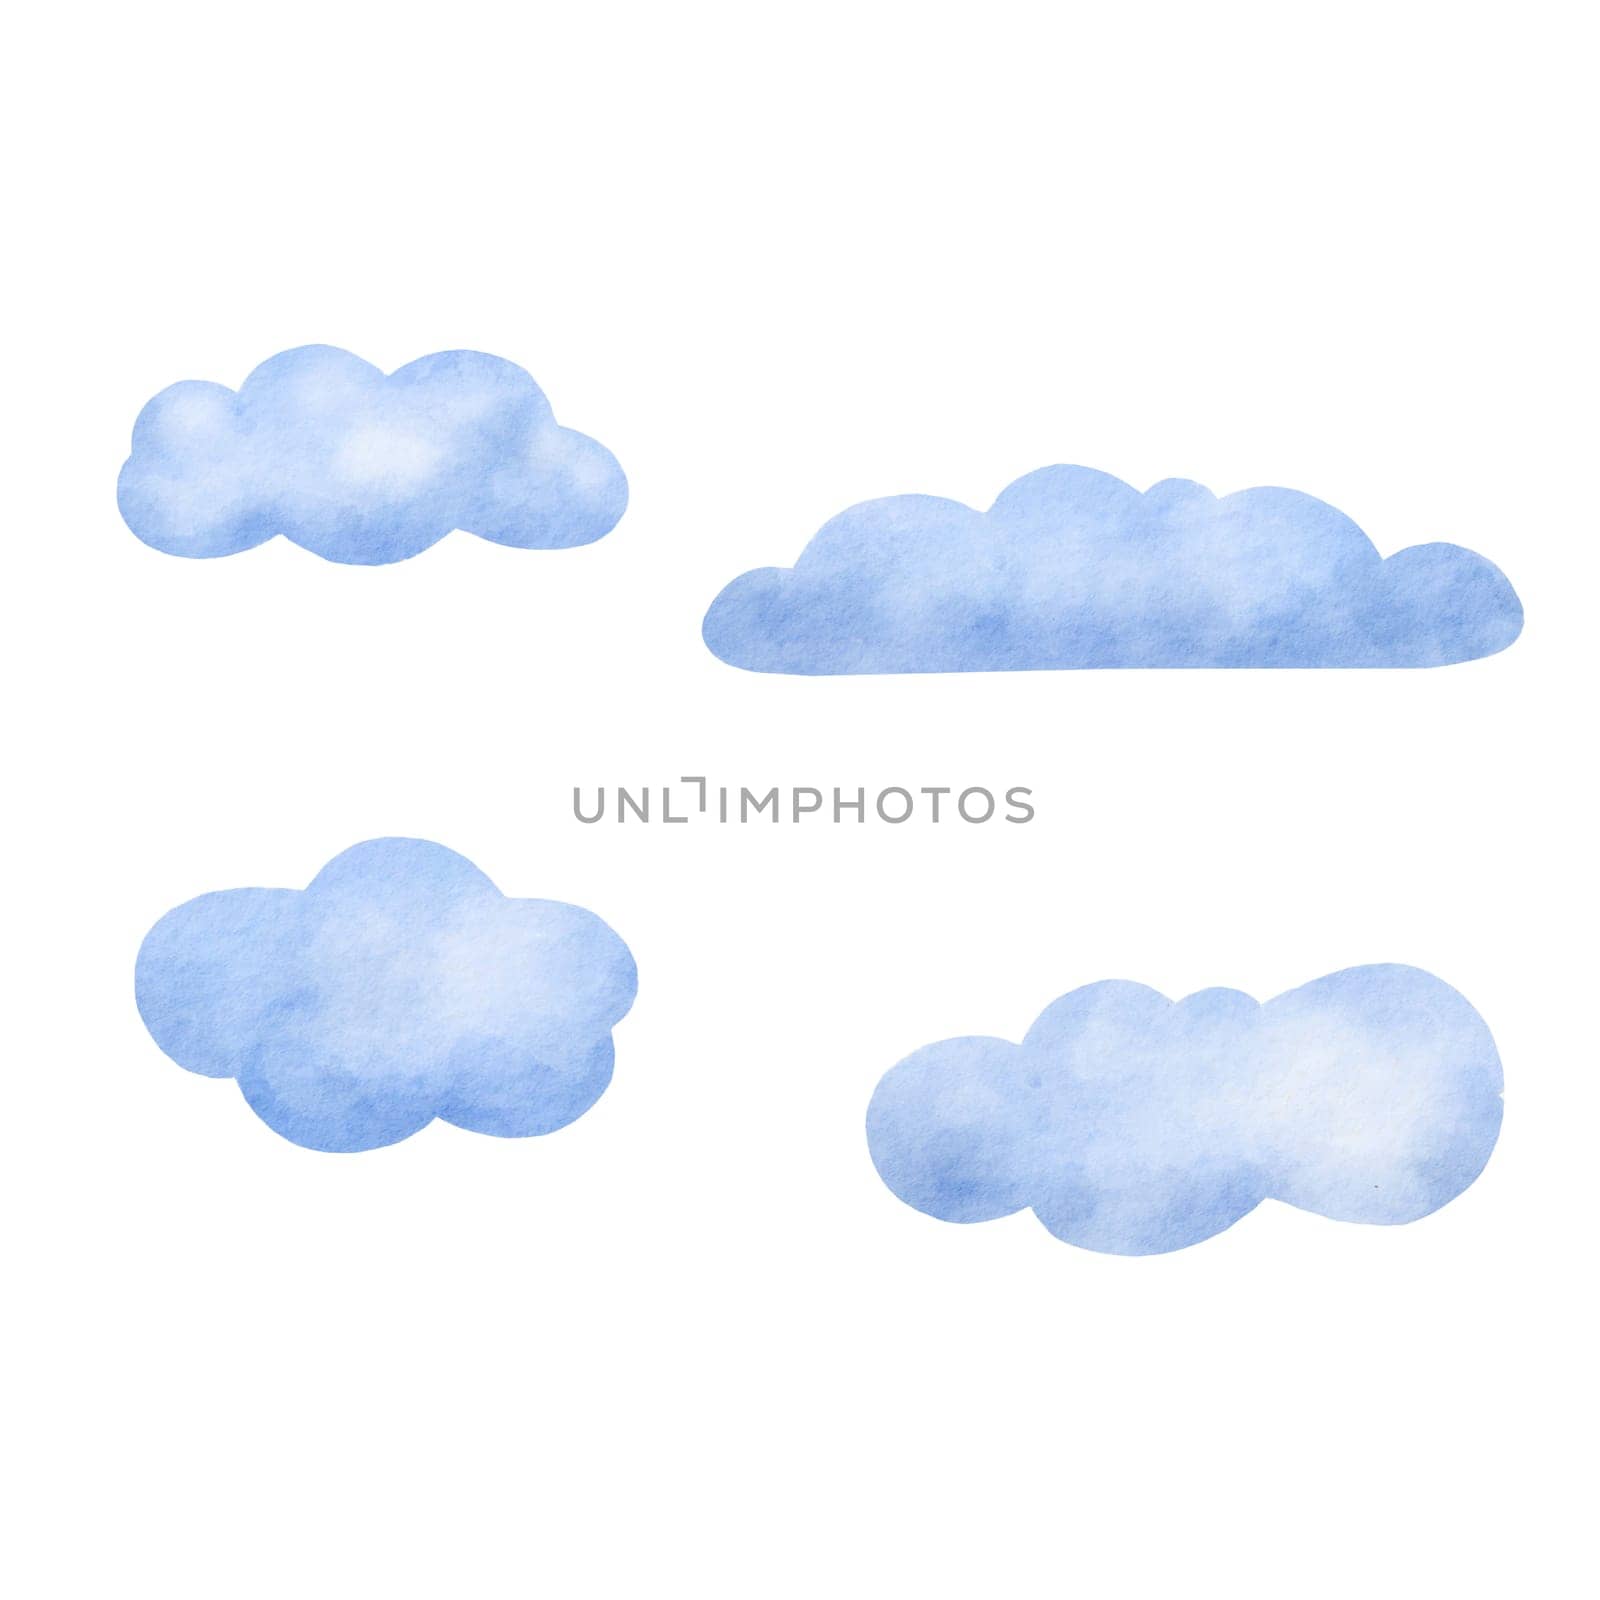 Cloud shapes collection. Set of Cloud different forms. Watercolor cute illustration isolated on white background